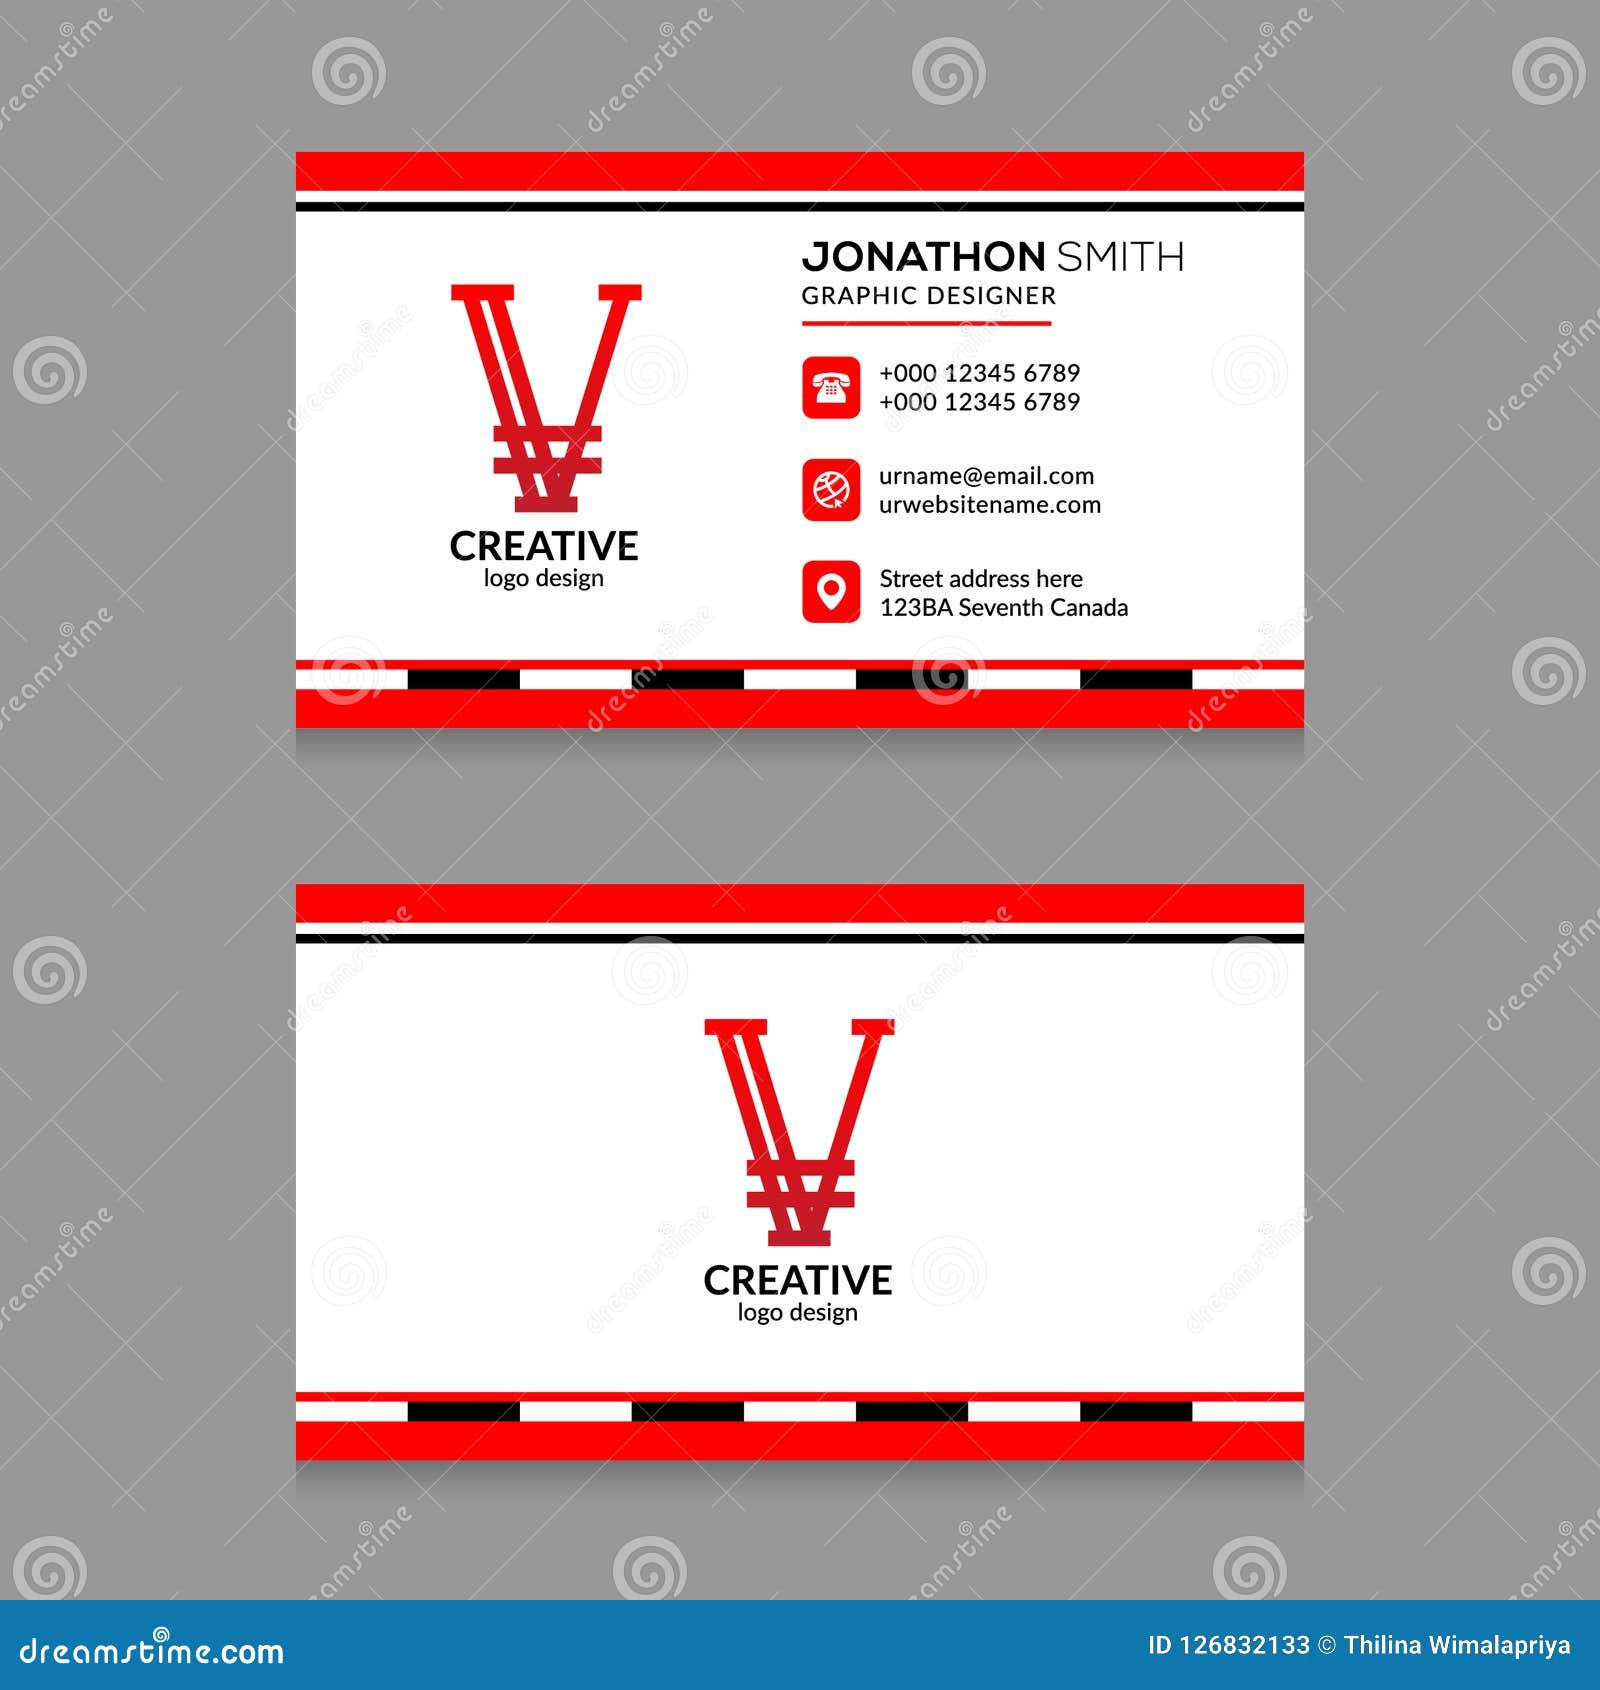 Business Card Background Images HD Pictures and Wallpaper For Free  Download  Pngtree